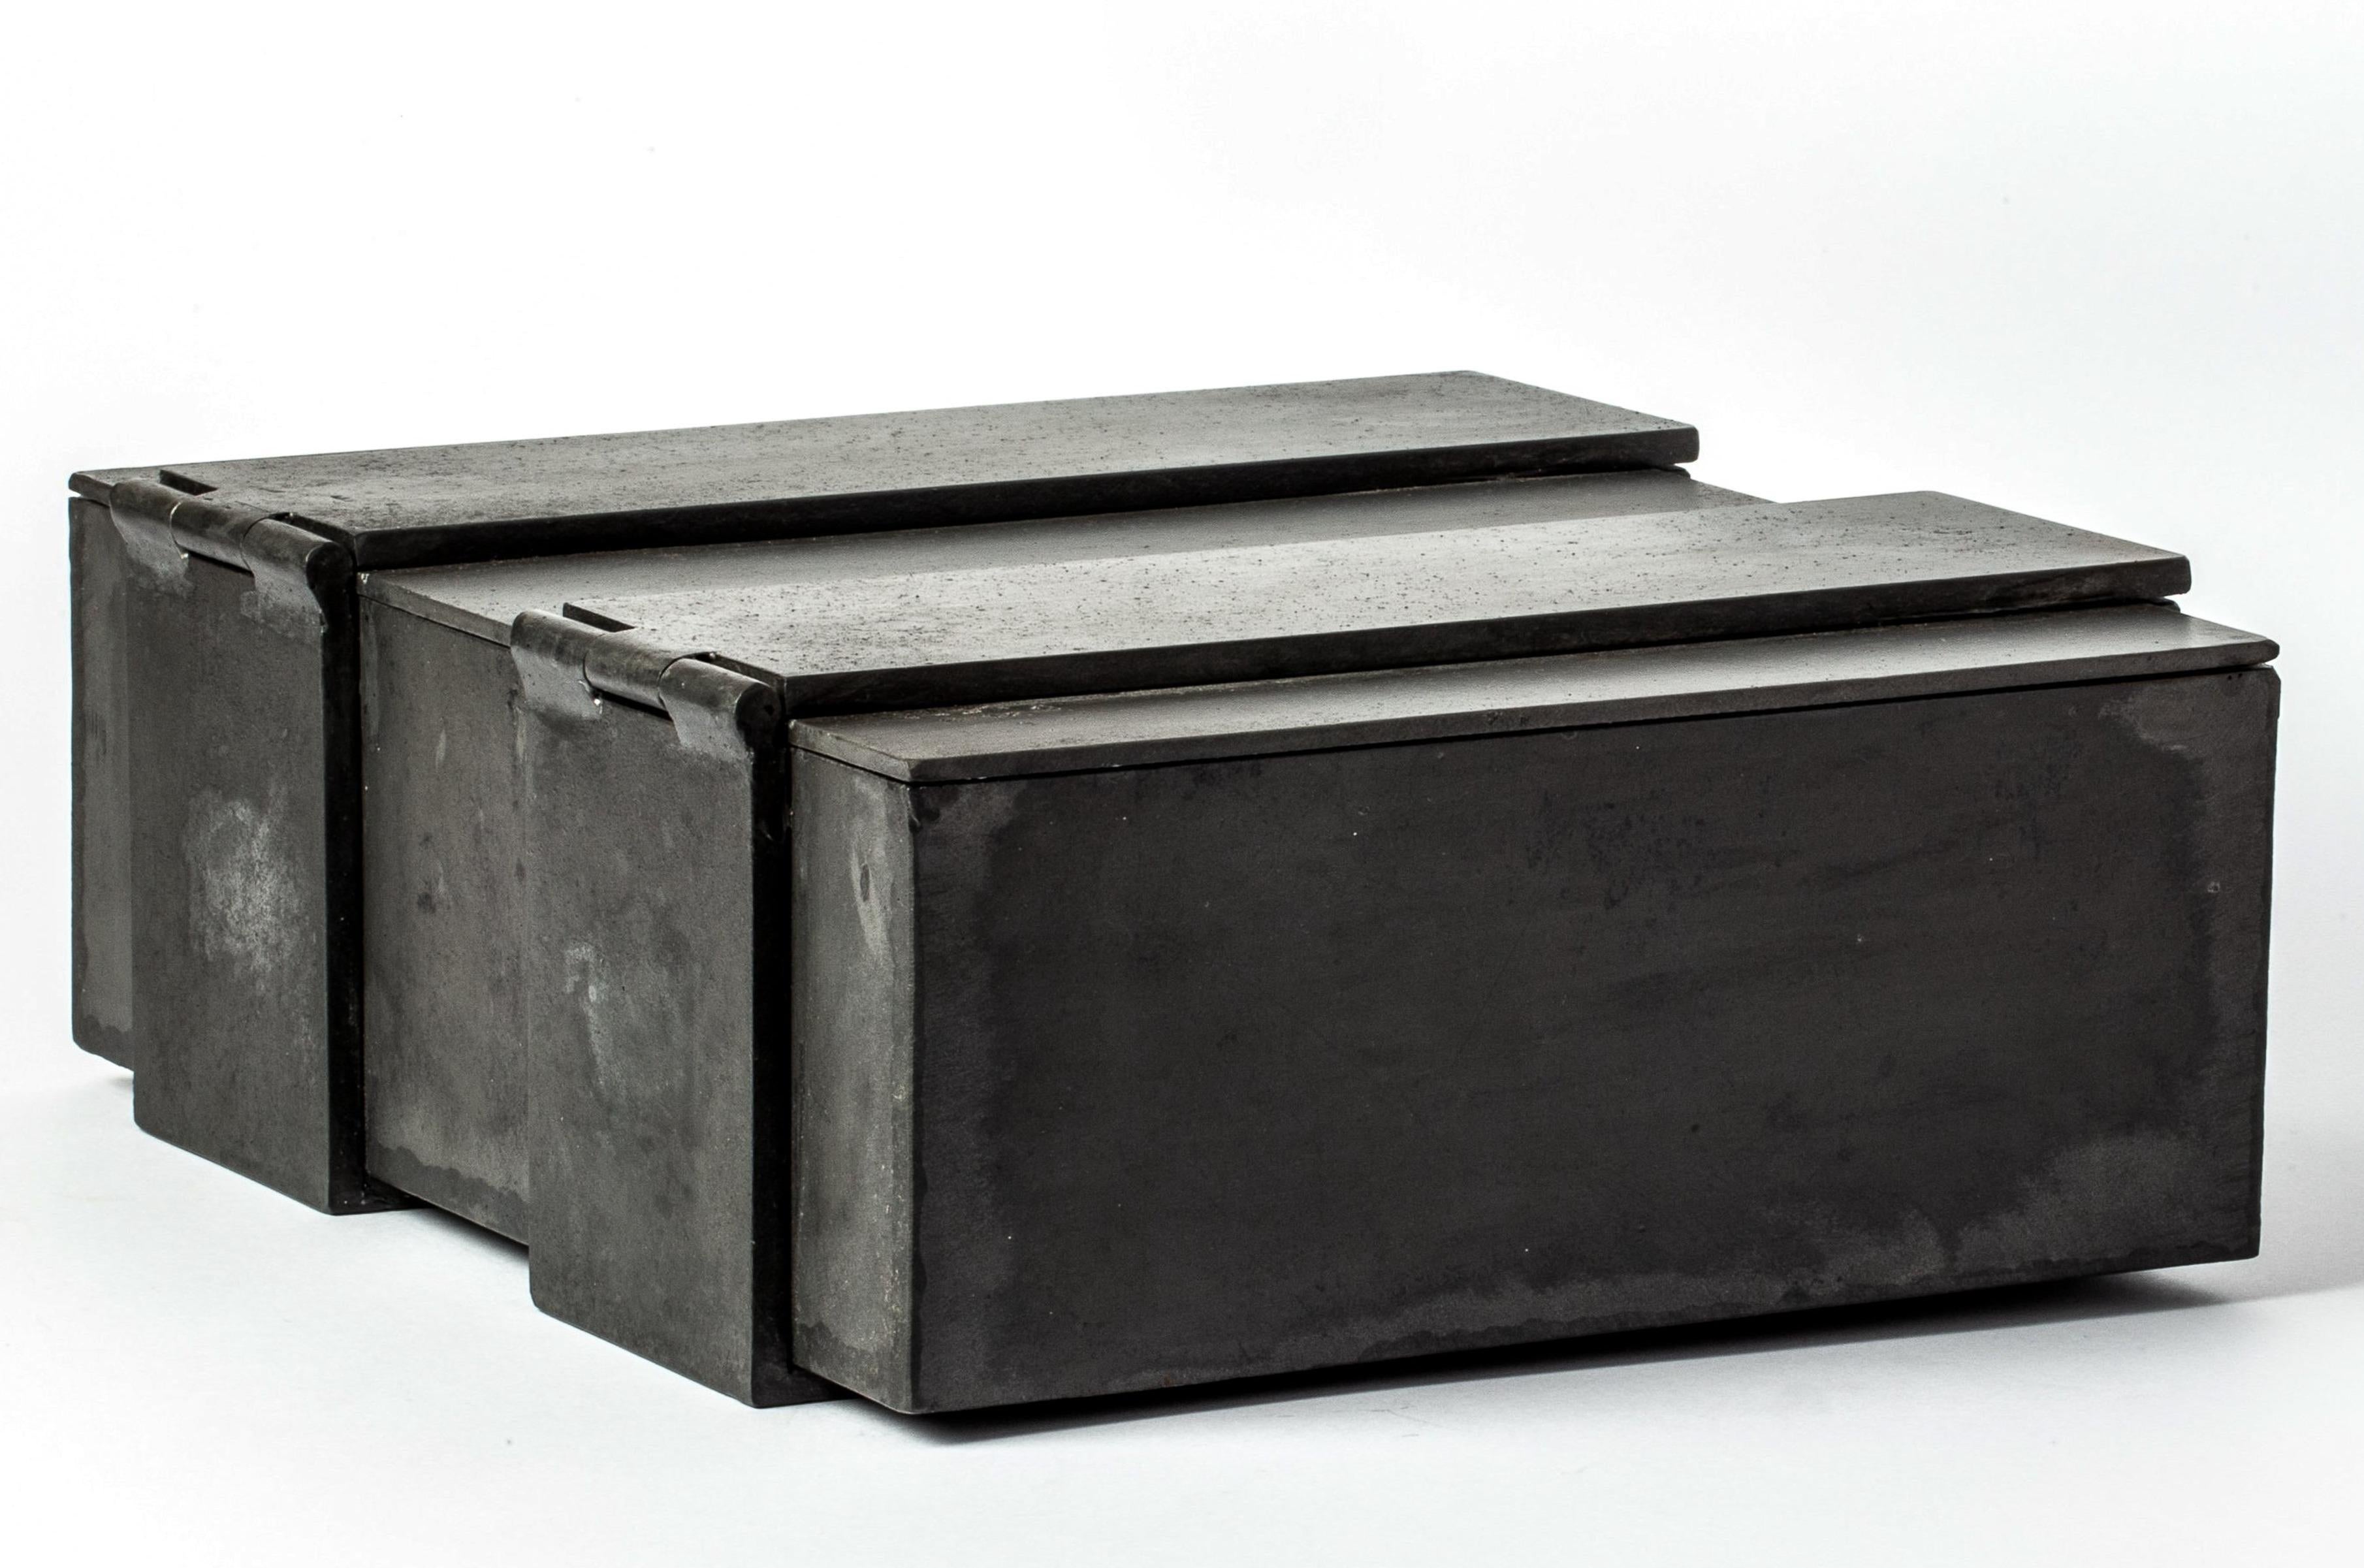 This box is hand-made from plate iron. Enhanced by a captivating acid oxidation finish. Its surface showcases a unique charm. Not only is this box a functional storage solution, but it's also a captivating work of art that adds character and